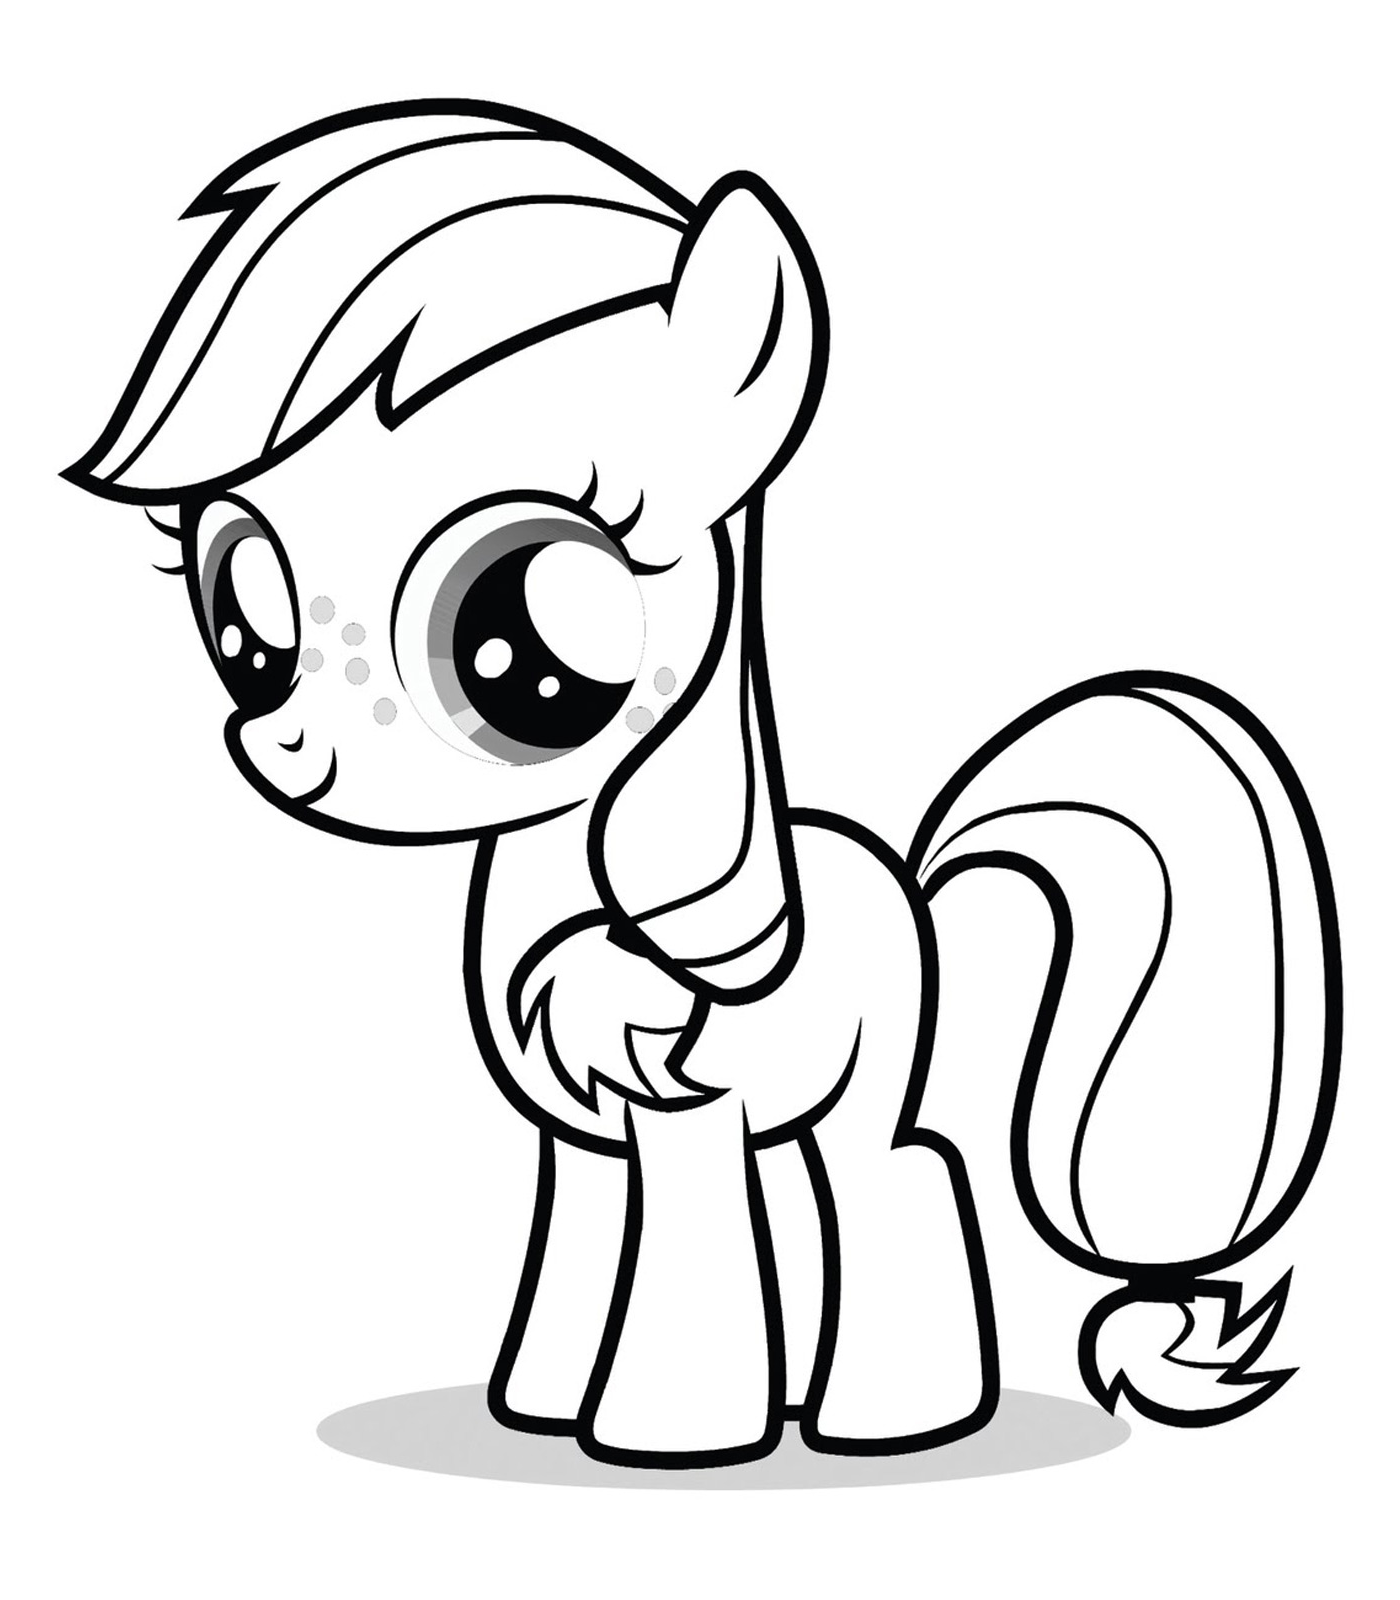 My Little Pony - Applejack with its tail tied